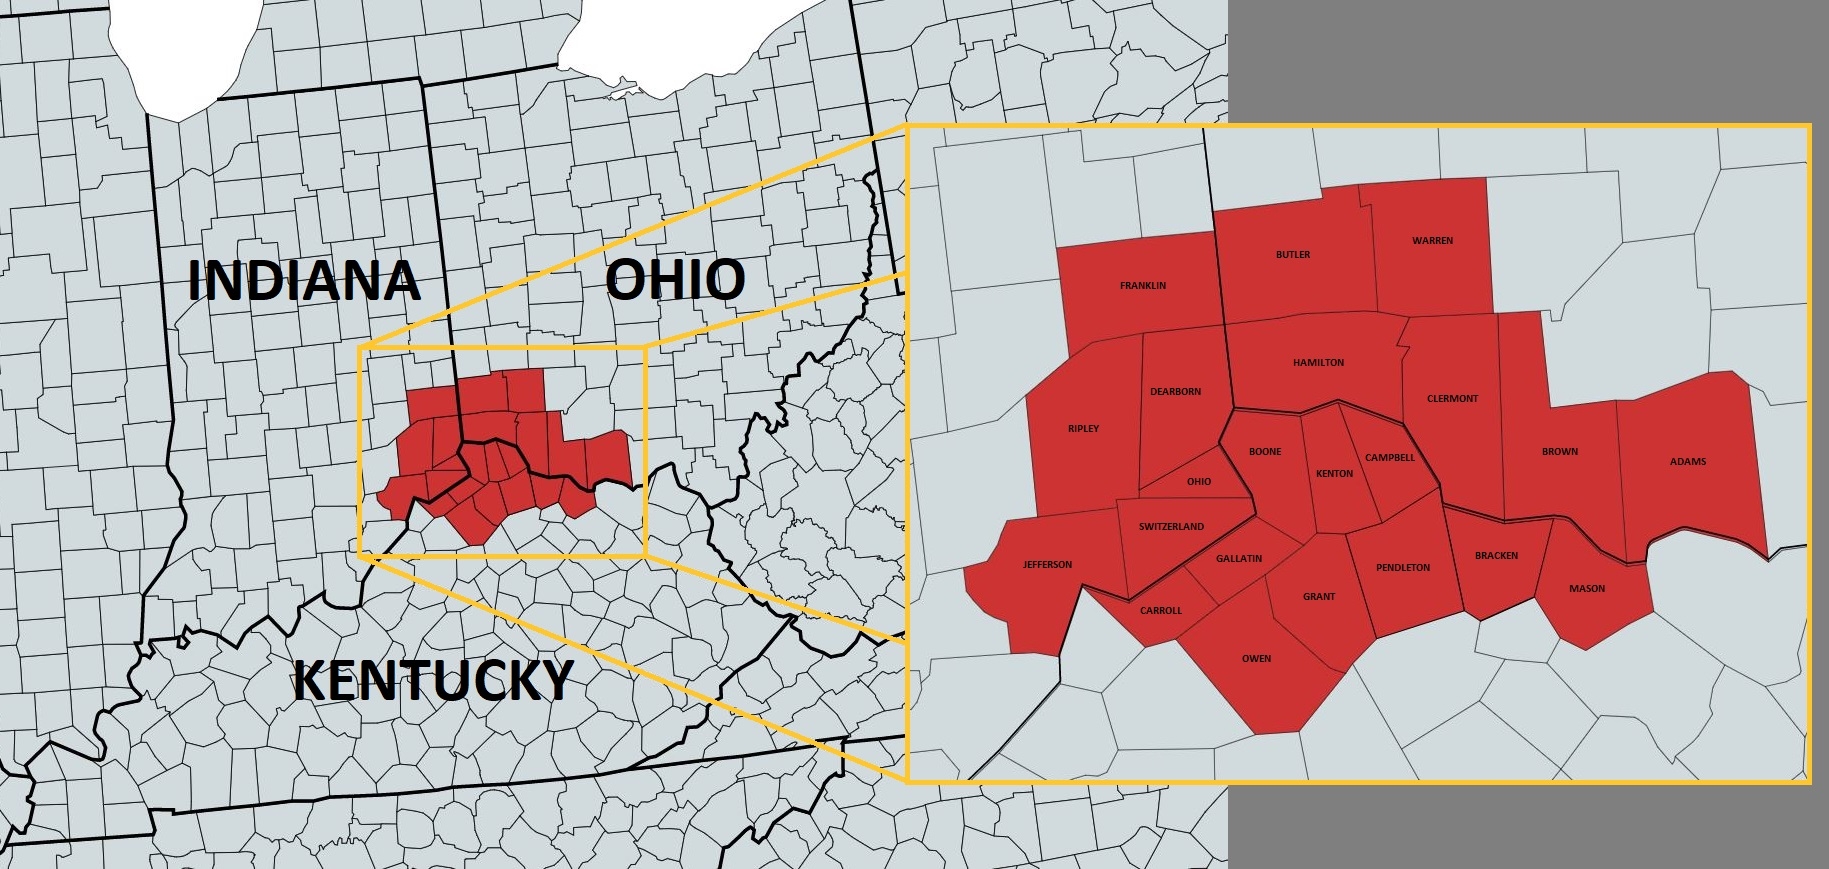 Exempt counties highlighted in red with context on the map for Indiana, Ohio, and Kentucky